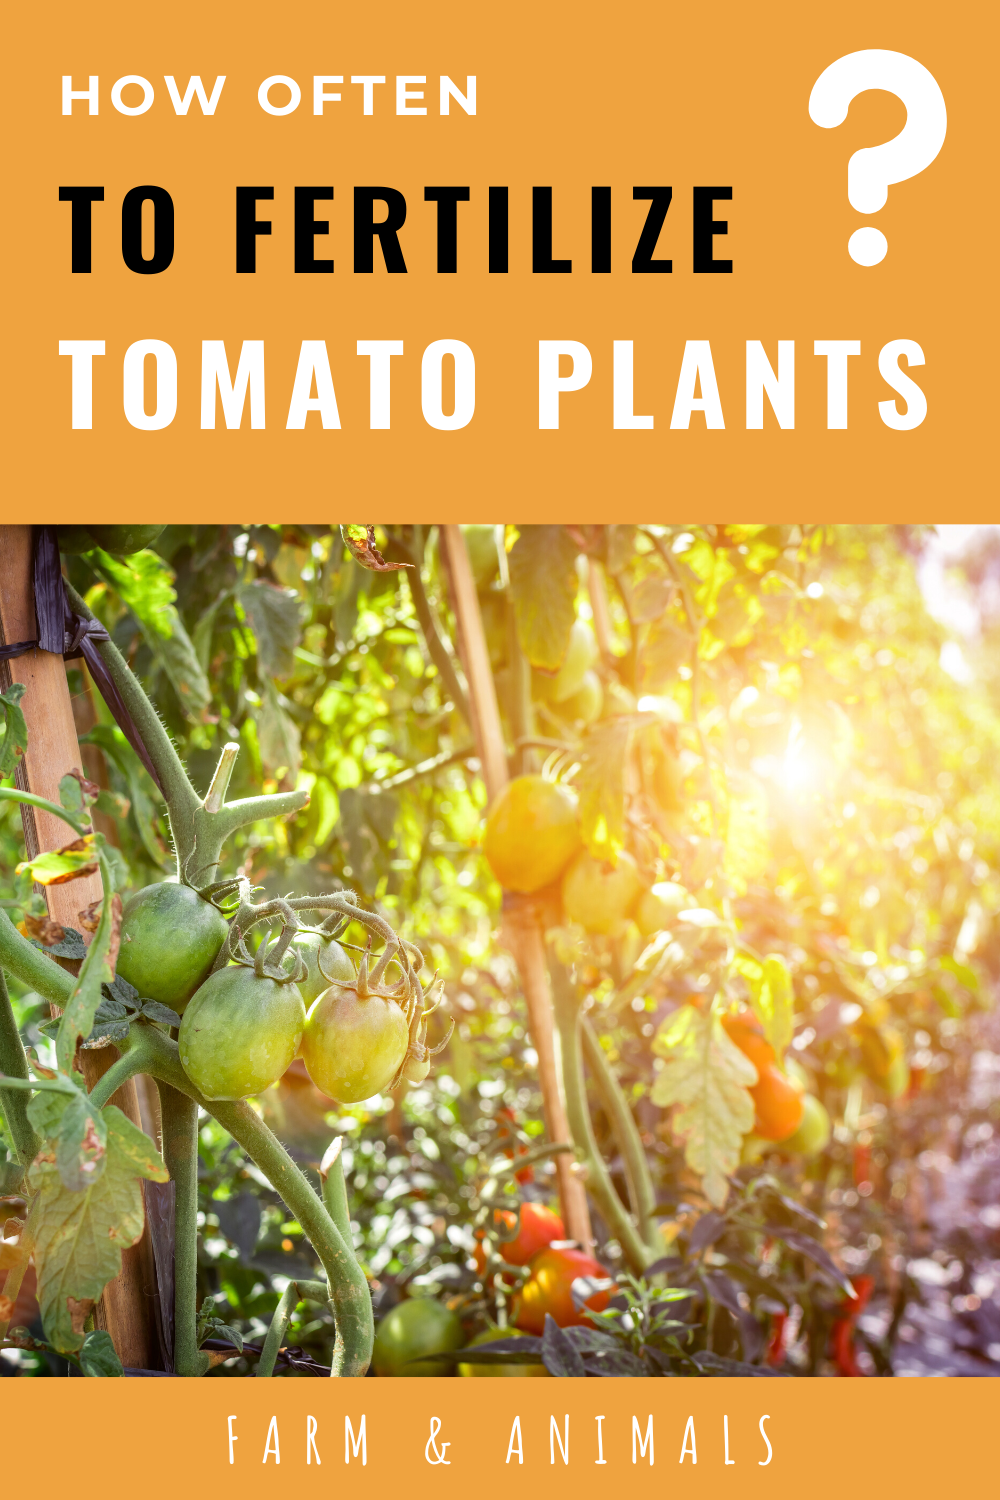 How Often To Fertilize Tomatoes: A Comprehensive Guide